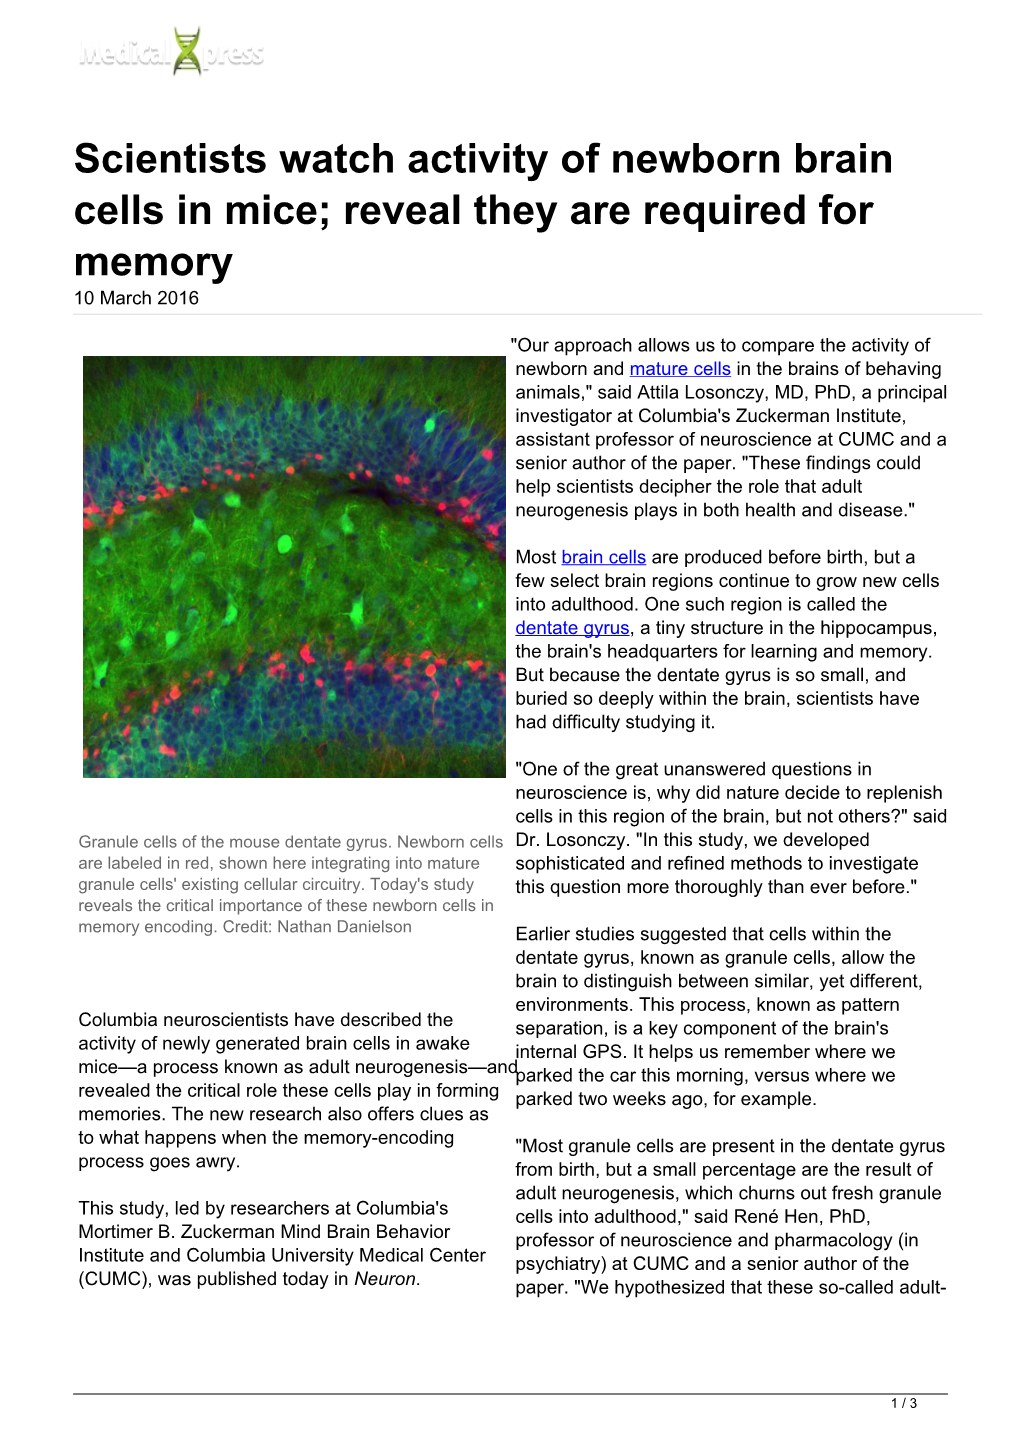 Scientists Watch Activity of Newborn Brain Cells in Mice; Reveal They Are Required for Memory 10 March 2016